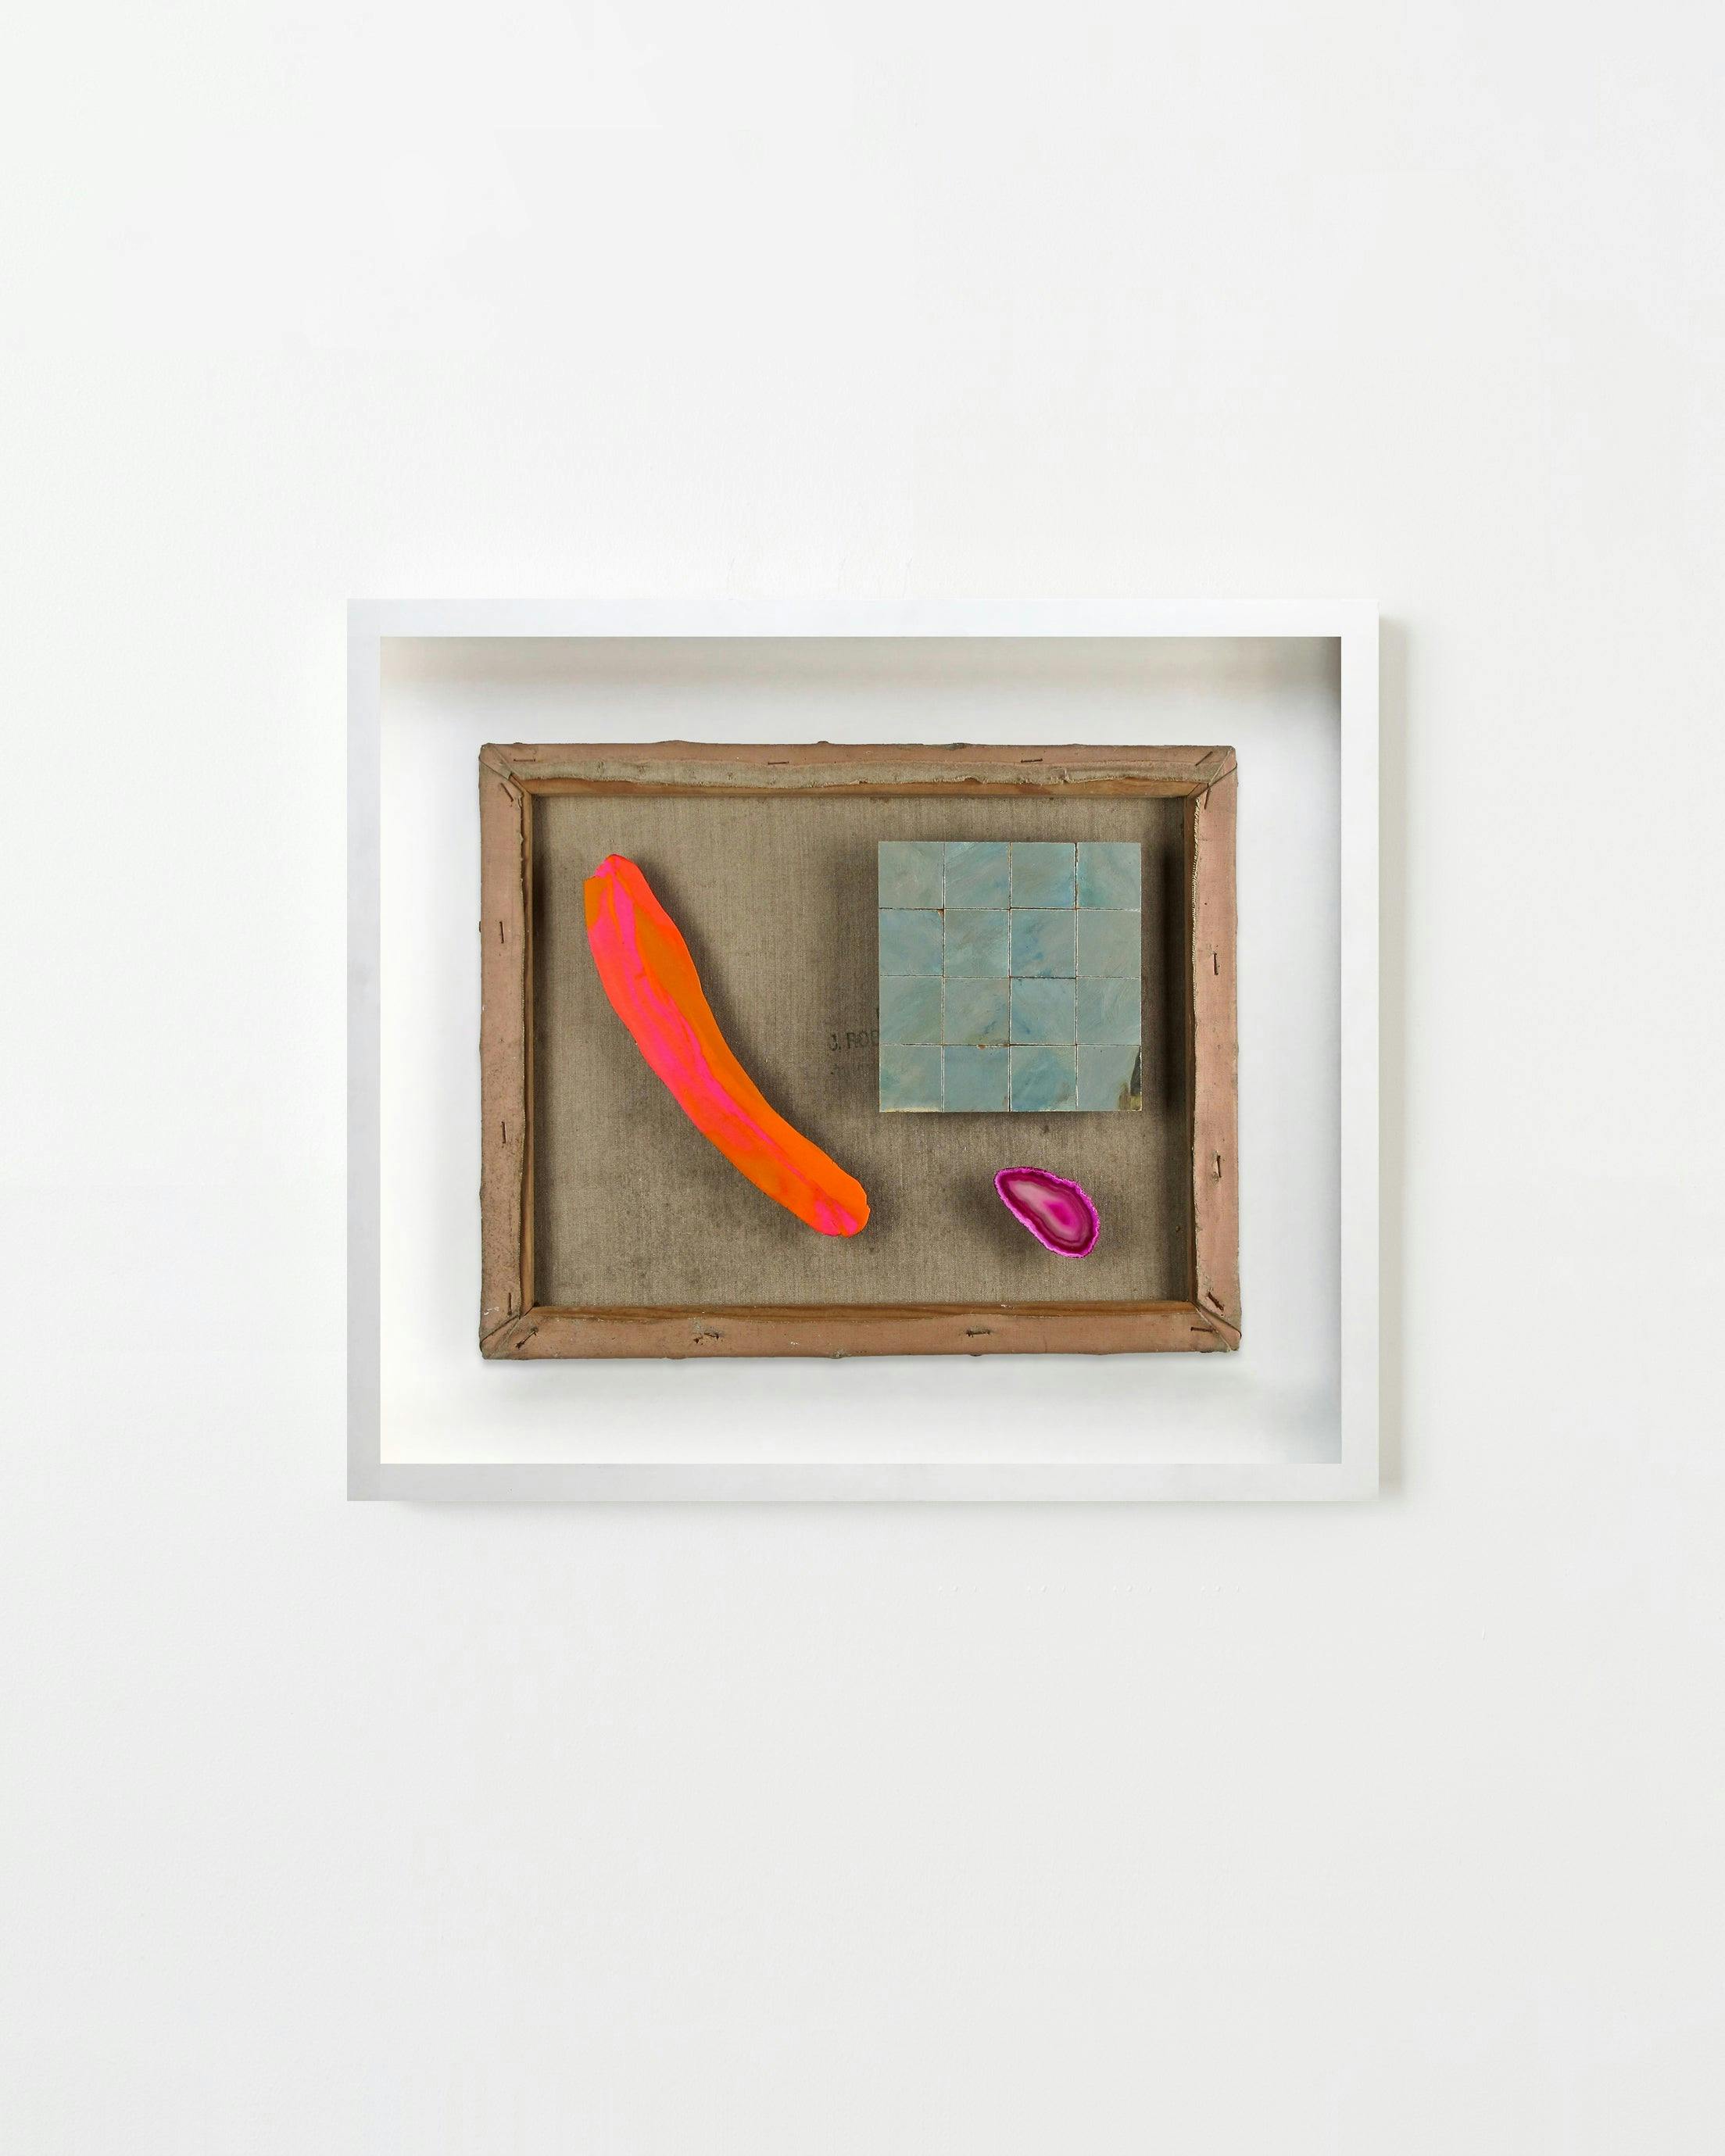 Mixed Media by Ferris McGuinty titled "Untitled (1703)".